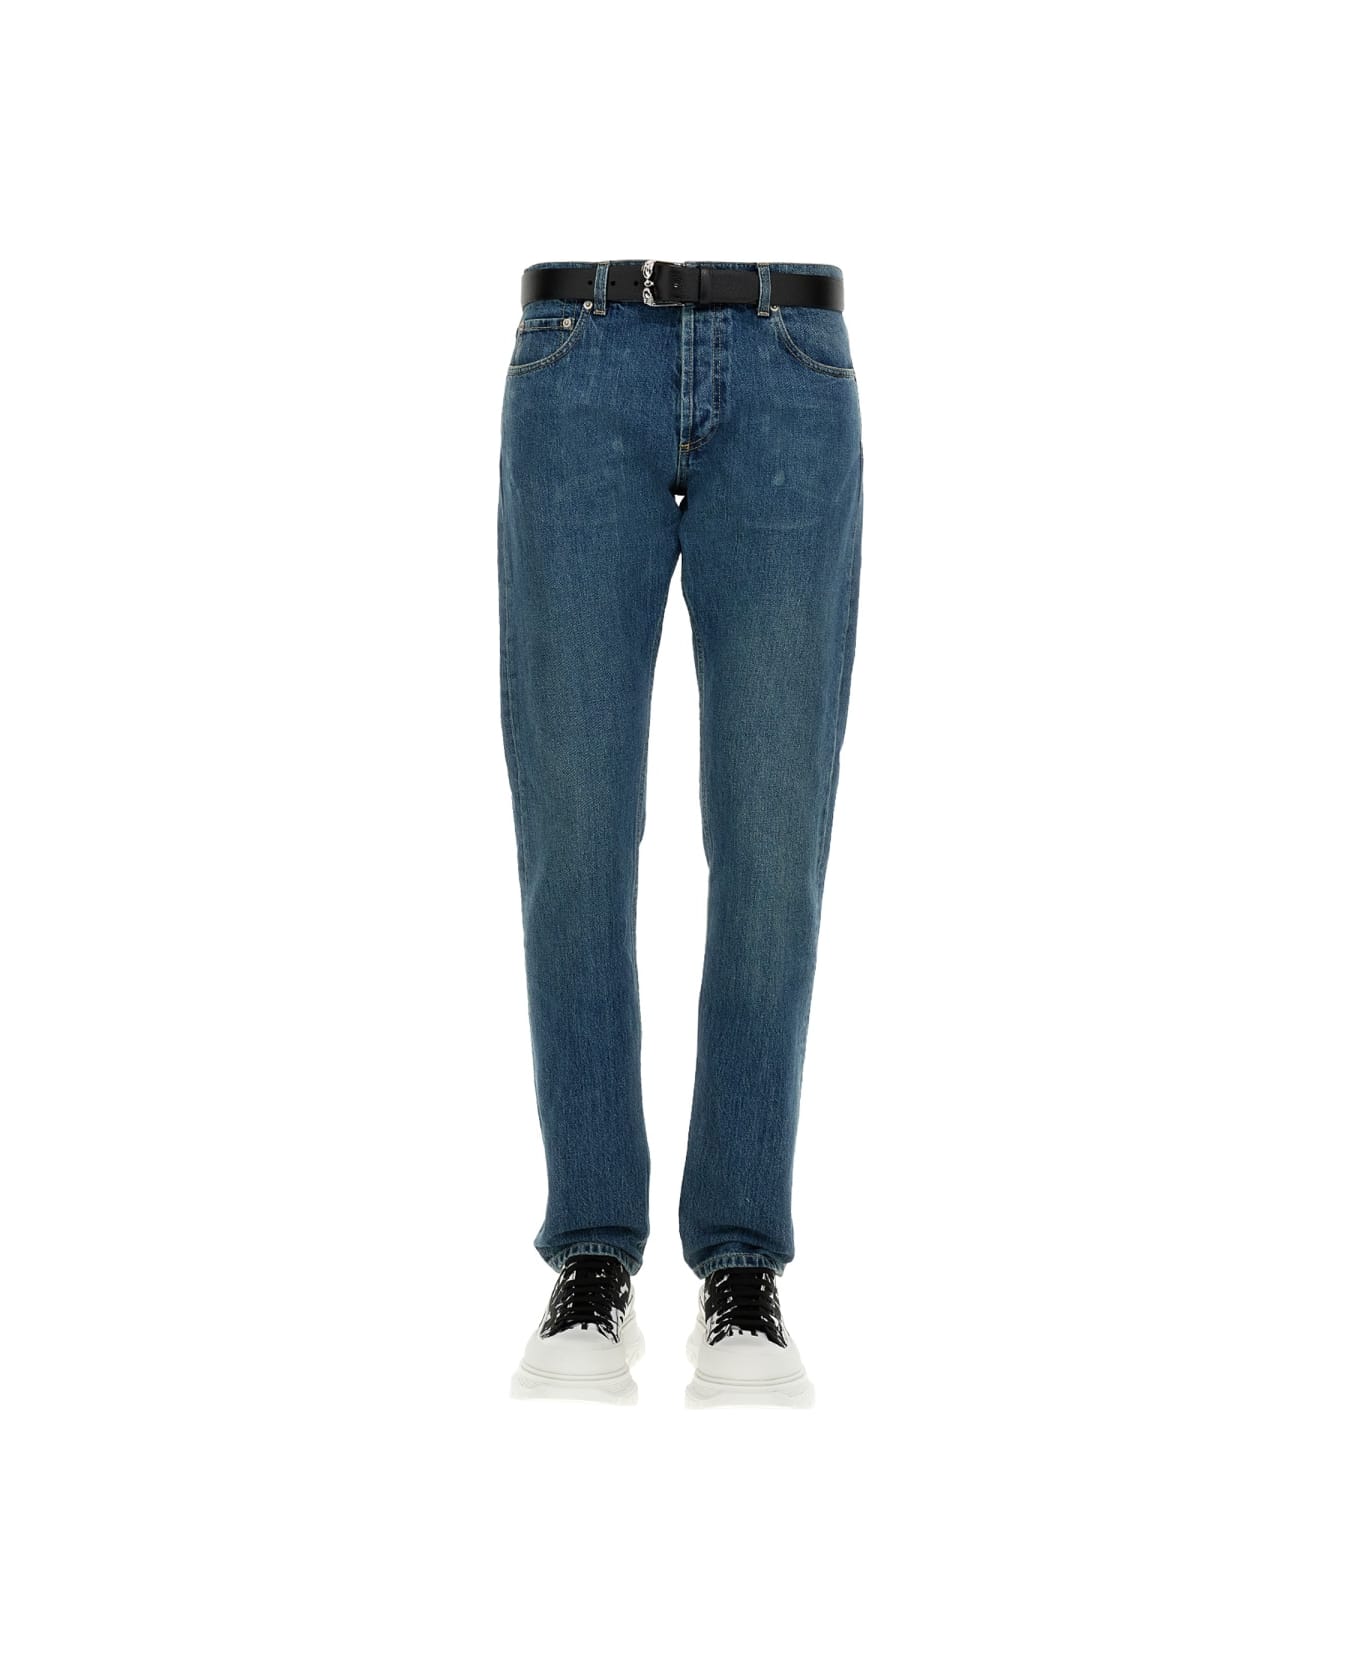 Alexander McQueen Jeans With Embroidered Logo - BLUE デニム